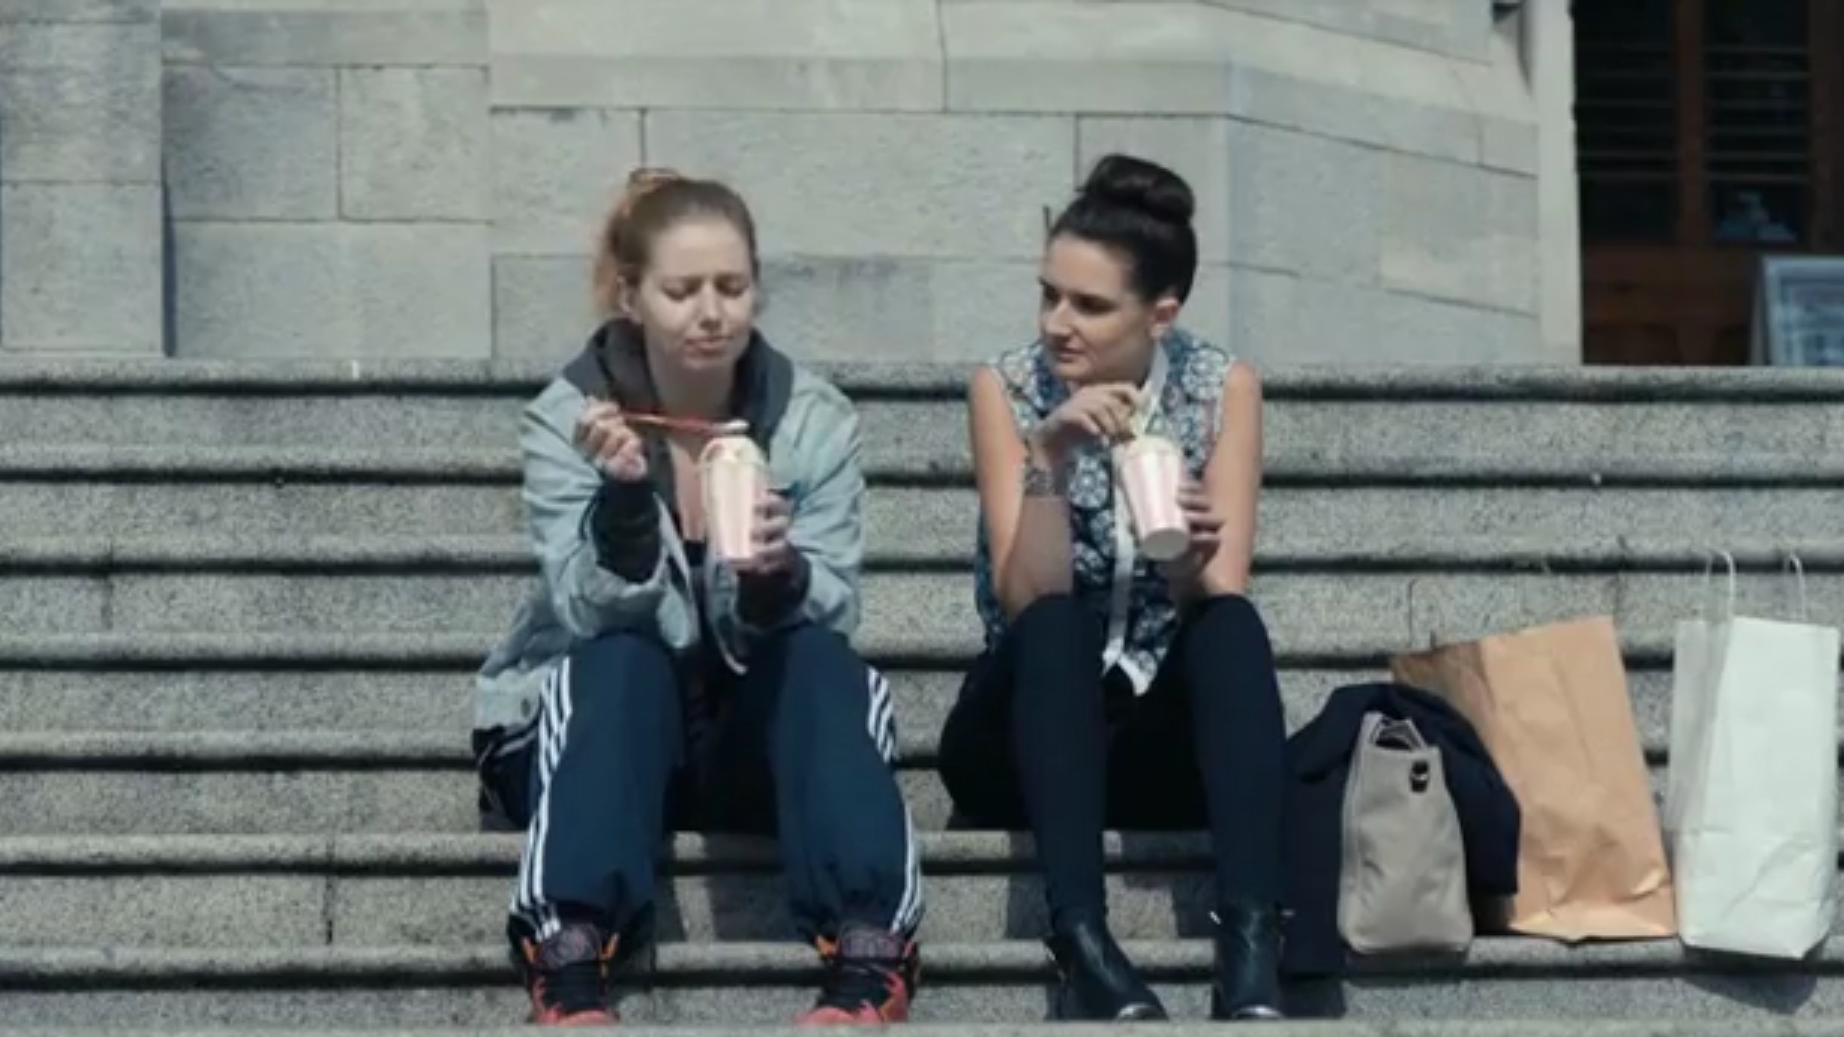 Two women sit outside on the steps of a building, eating ice cream